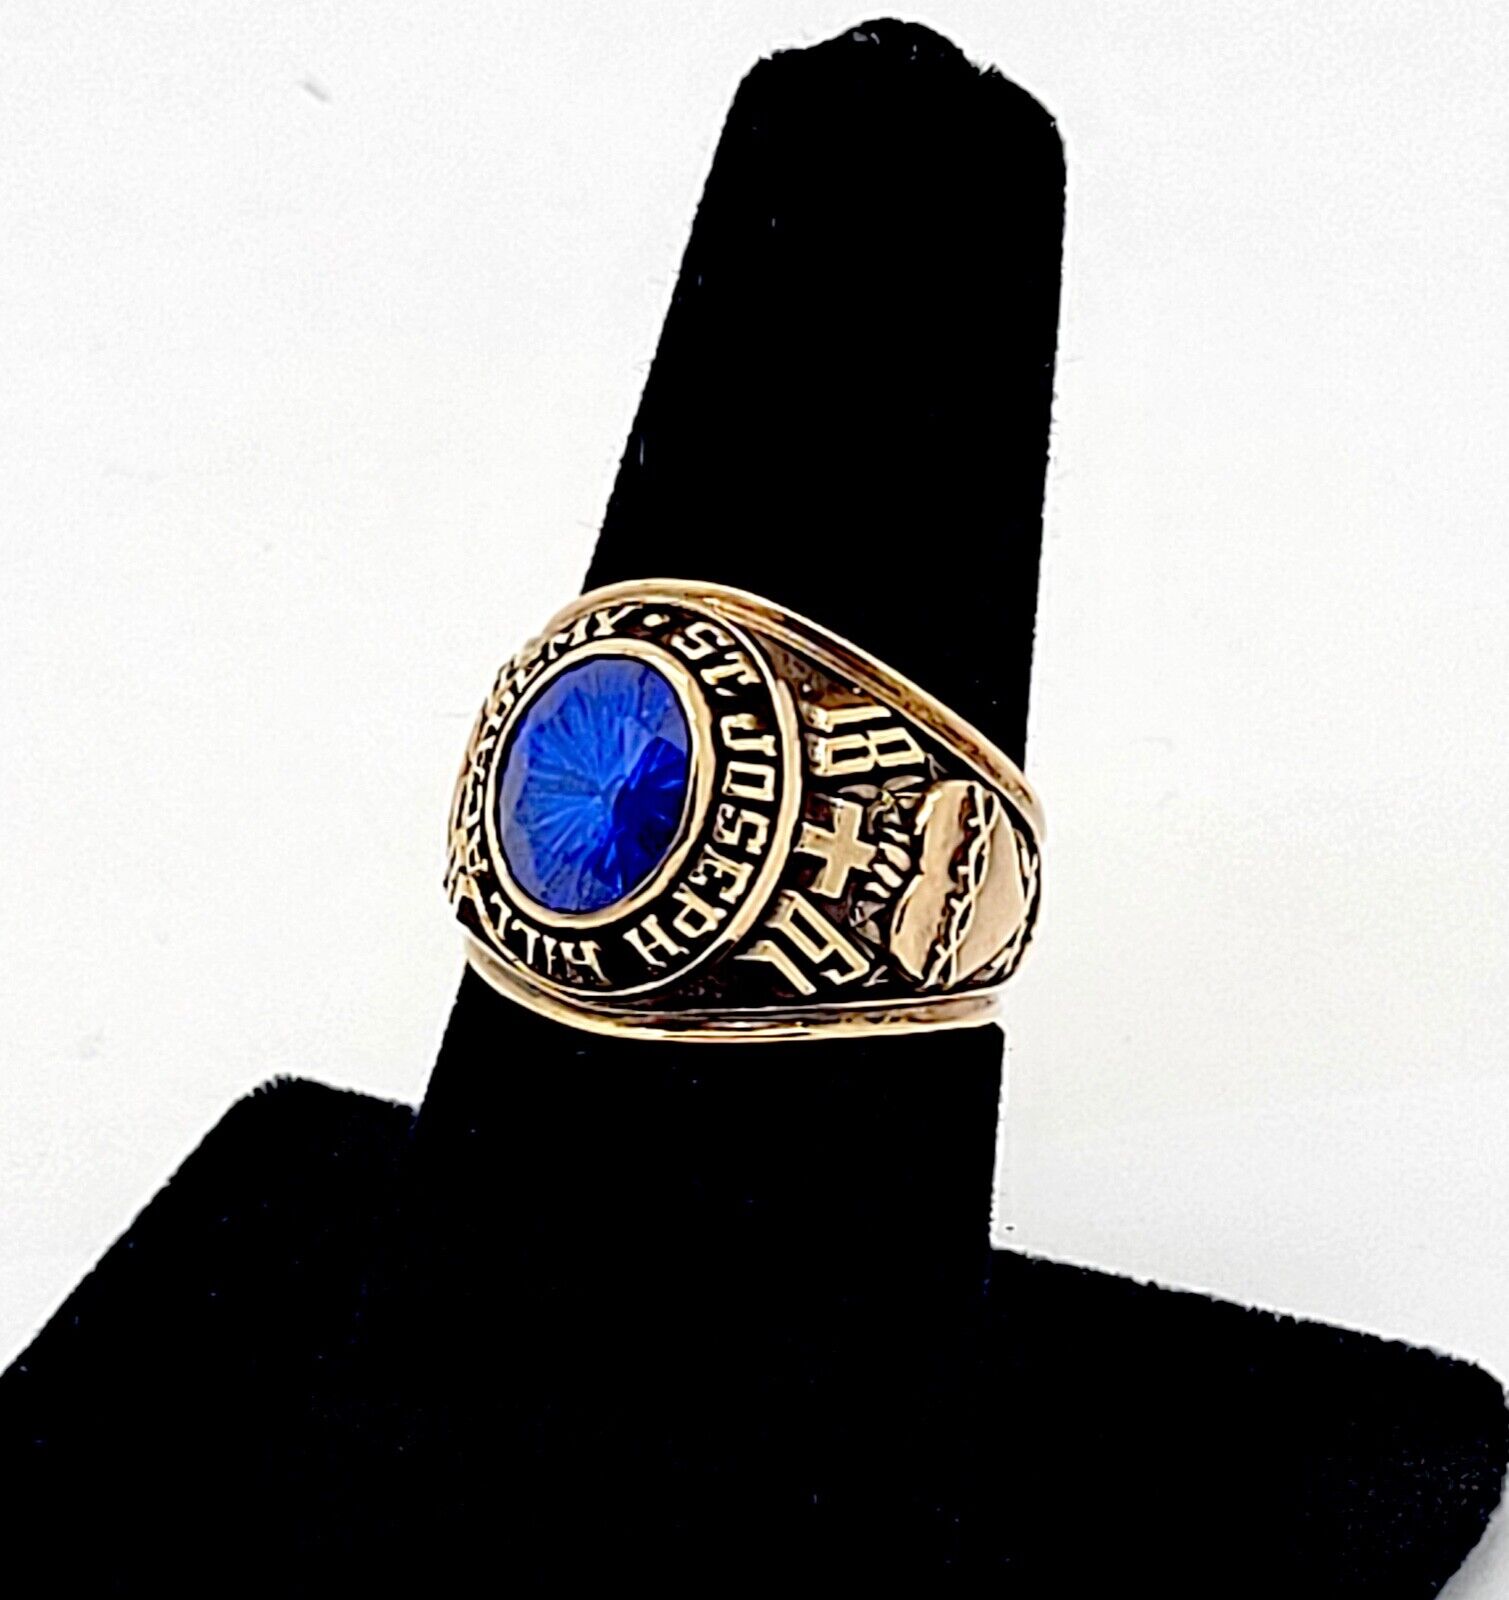 1981 ST JOSEPH HILL ACADEMY 10K GOLD LAB BLUE SPINEL CLASS RING,7, ROSE COSTA